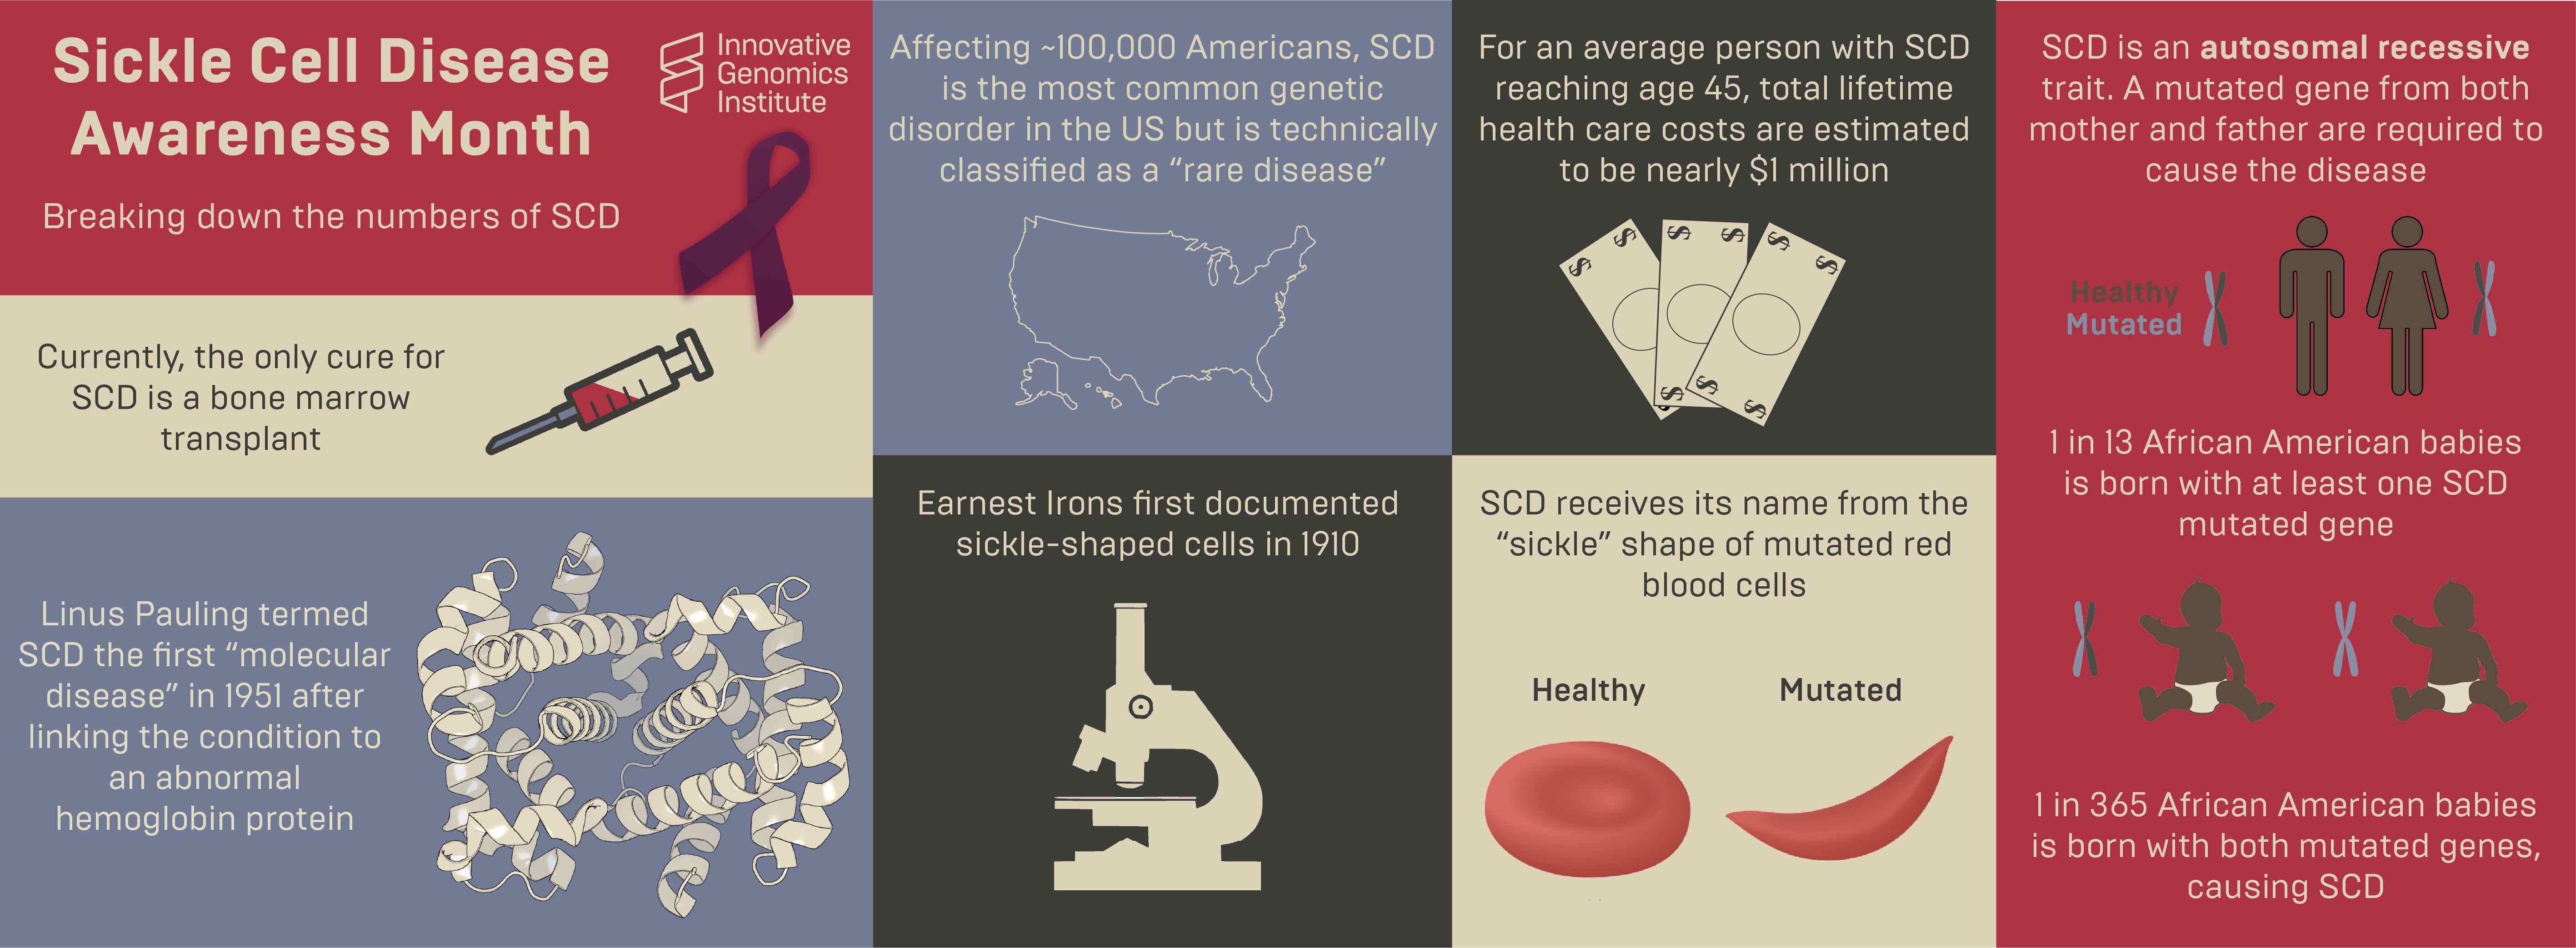 Infographic about sickle cell disease, describing basic facts and statistics